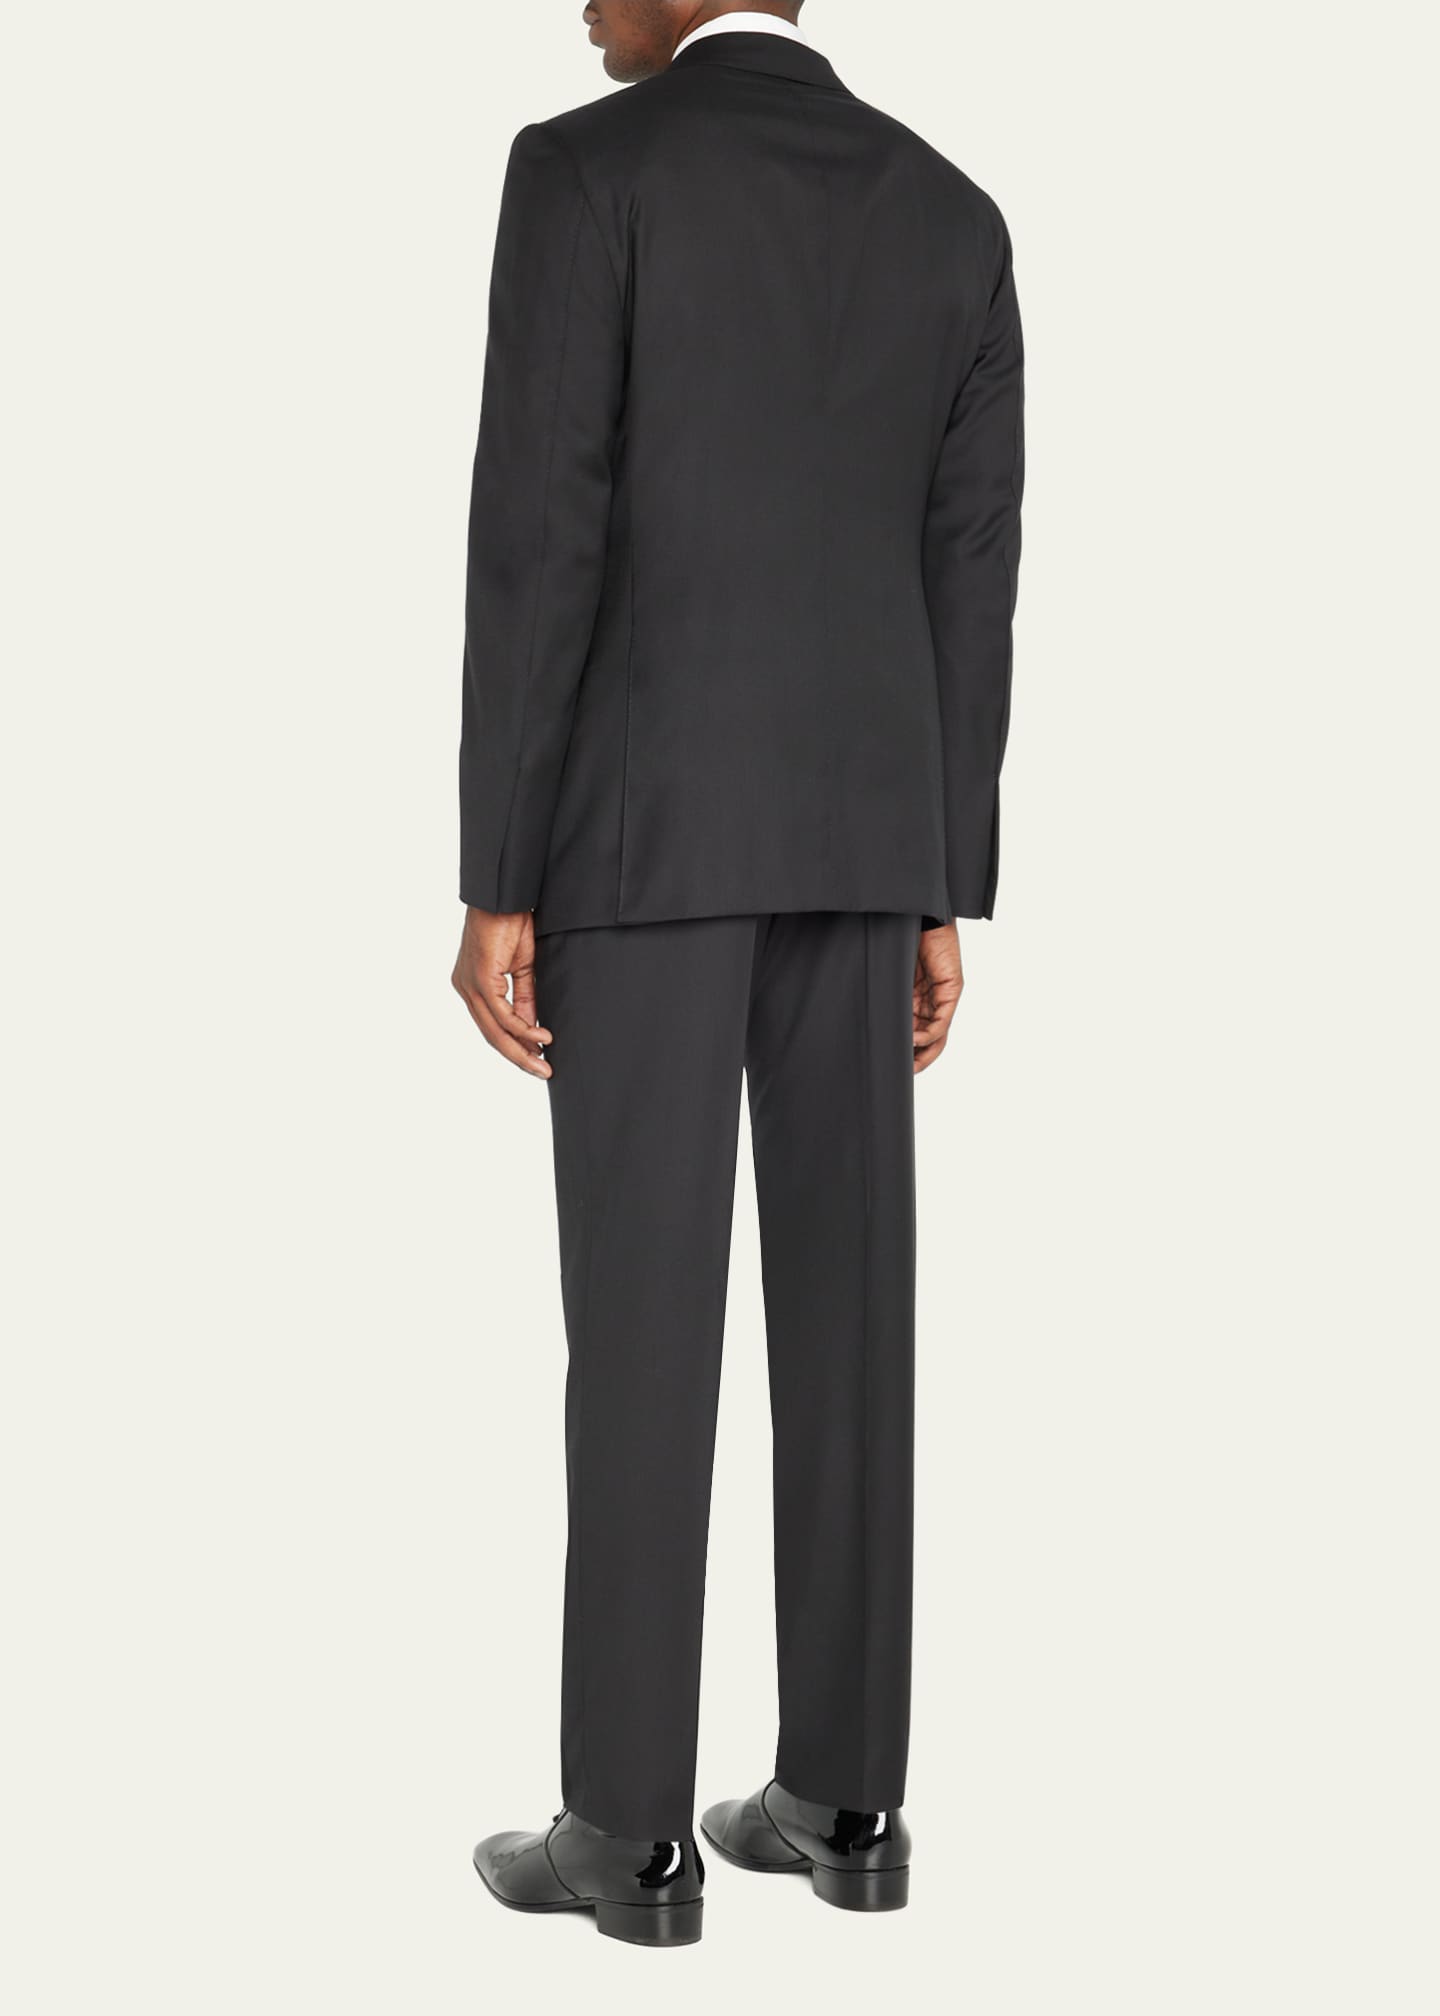 TOM FORD Men's Solid Master Twill Two-Piece Suit - Bergdorf Goodman